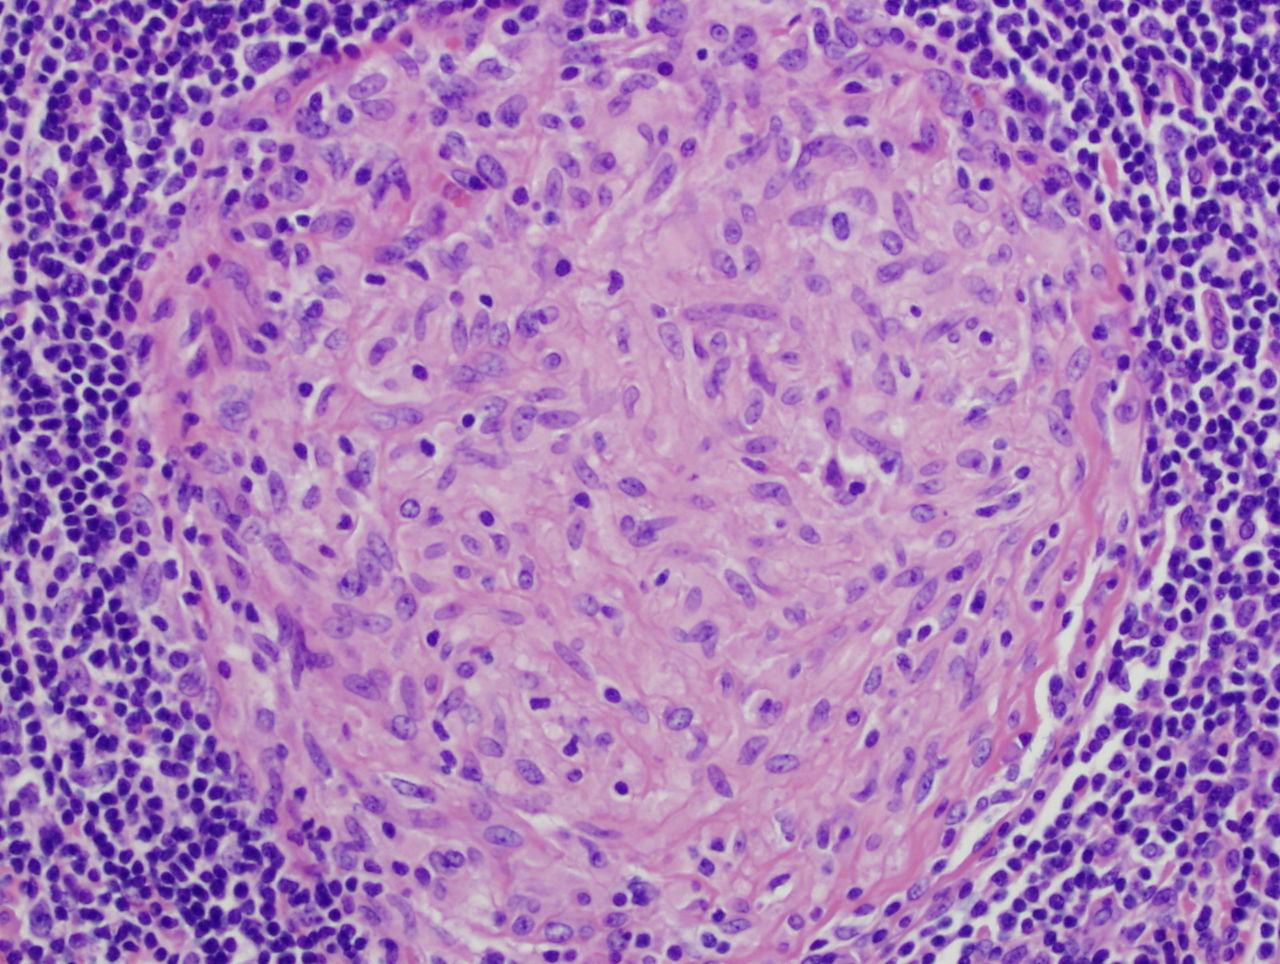 Picture of a granuloma (without necrosis) as seen through a microscope on a glass slide. The tissue on the slide is stained with two standard dyes (hematoxylin: blue, eosin: pink) to make it visible. The granuloma in this picture was found in a lymph node of a patient with Mycobacterium avium infection.